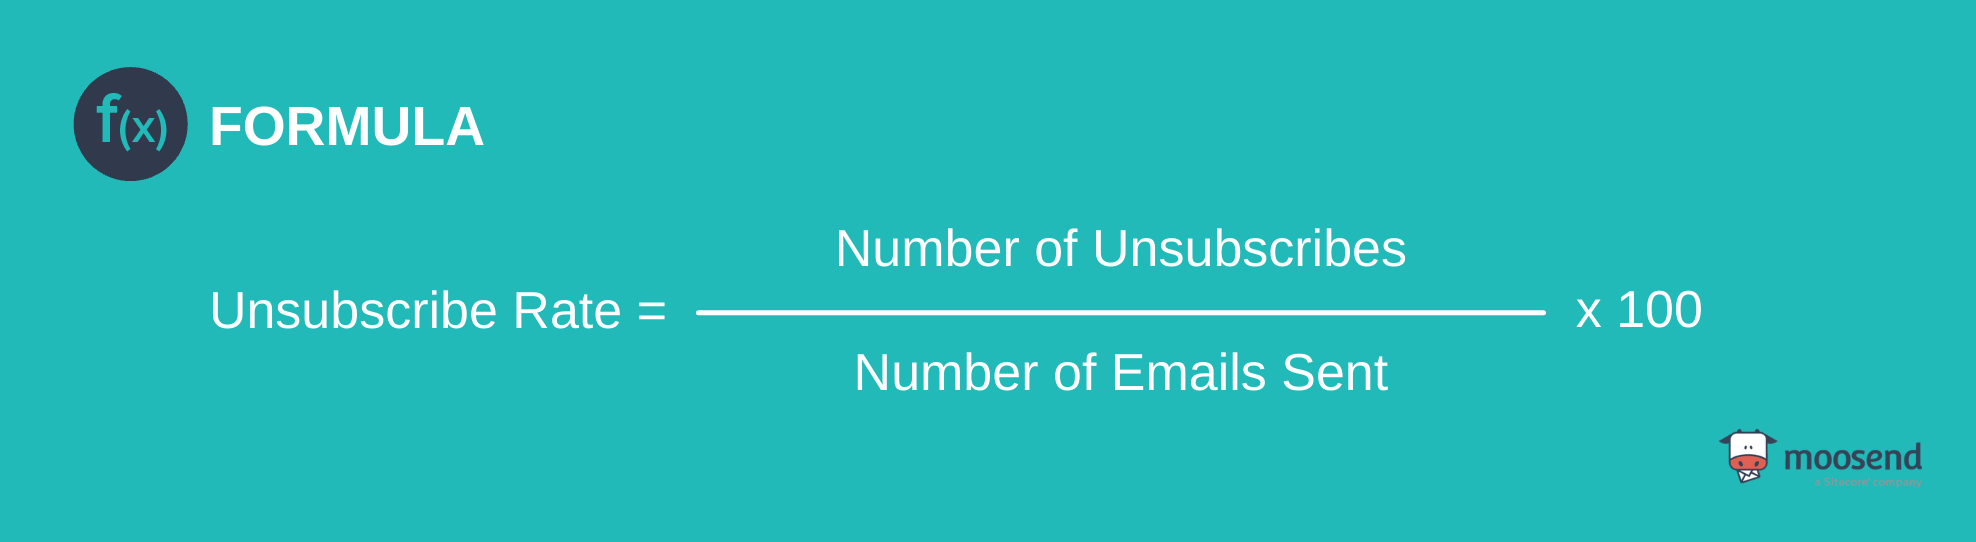 unsubscribe rate calculation